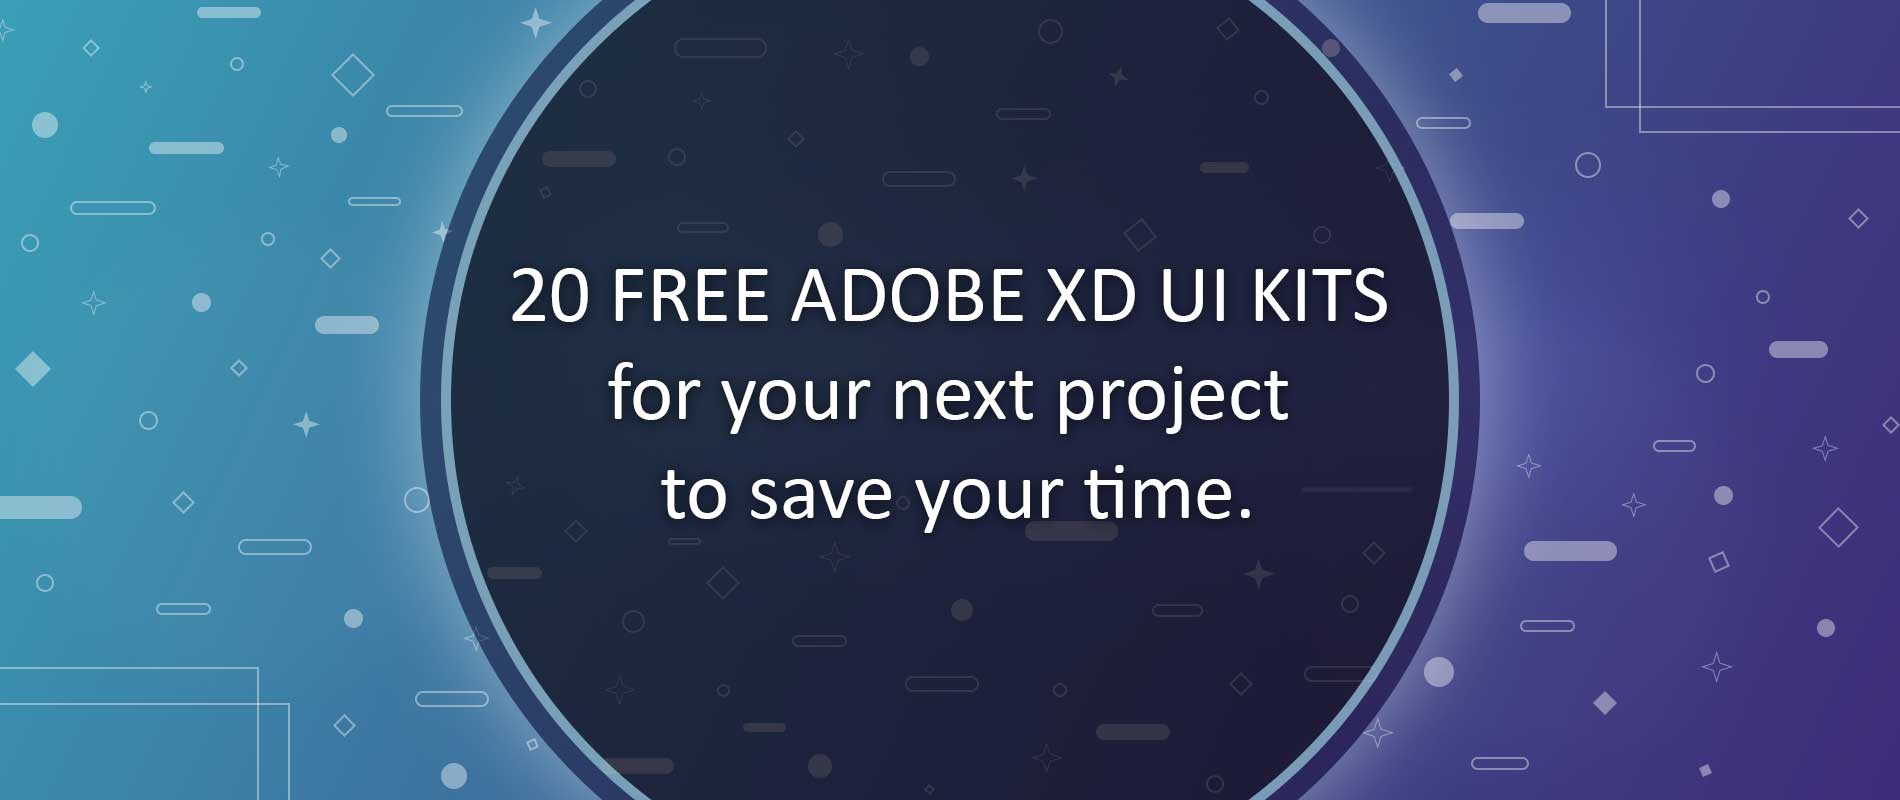 You are currently viewing 20 Free Adobe XD UI kits for your next project to save your time.